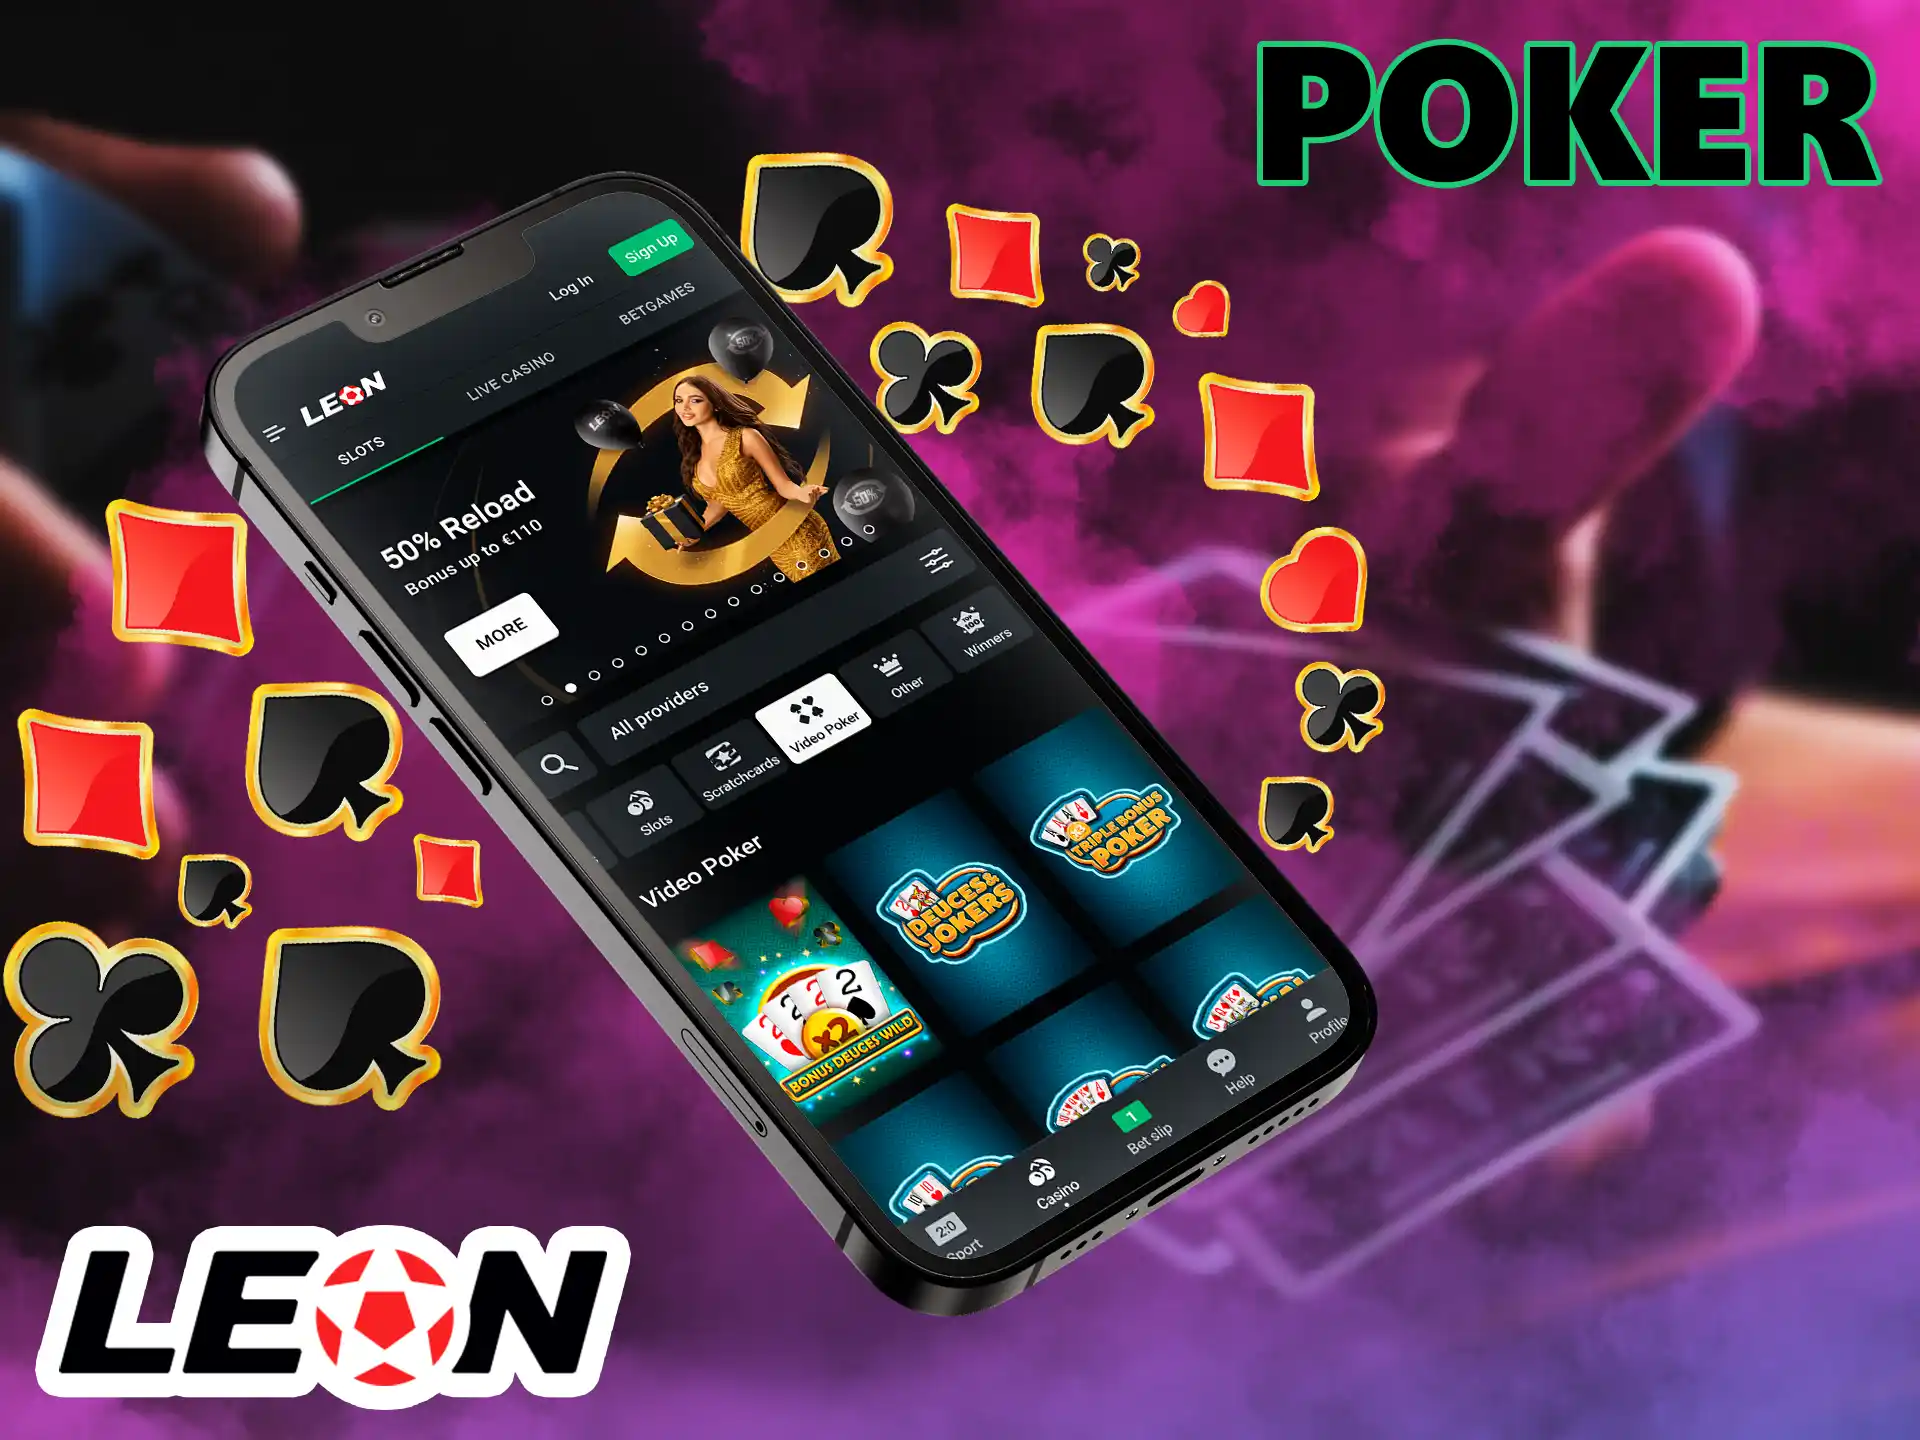 Leon Bet players need to collect the strongest card hand in this type of game, also in the course of the game users are allowed to increase the bet.